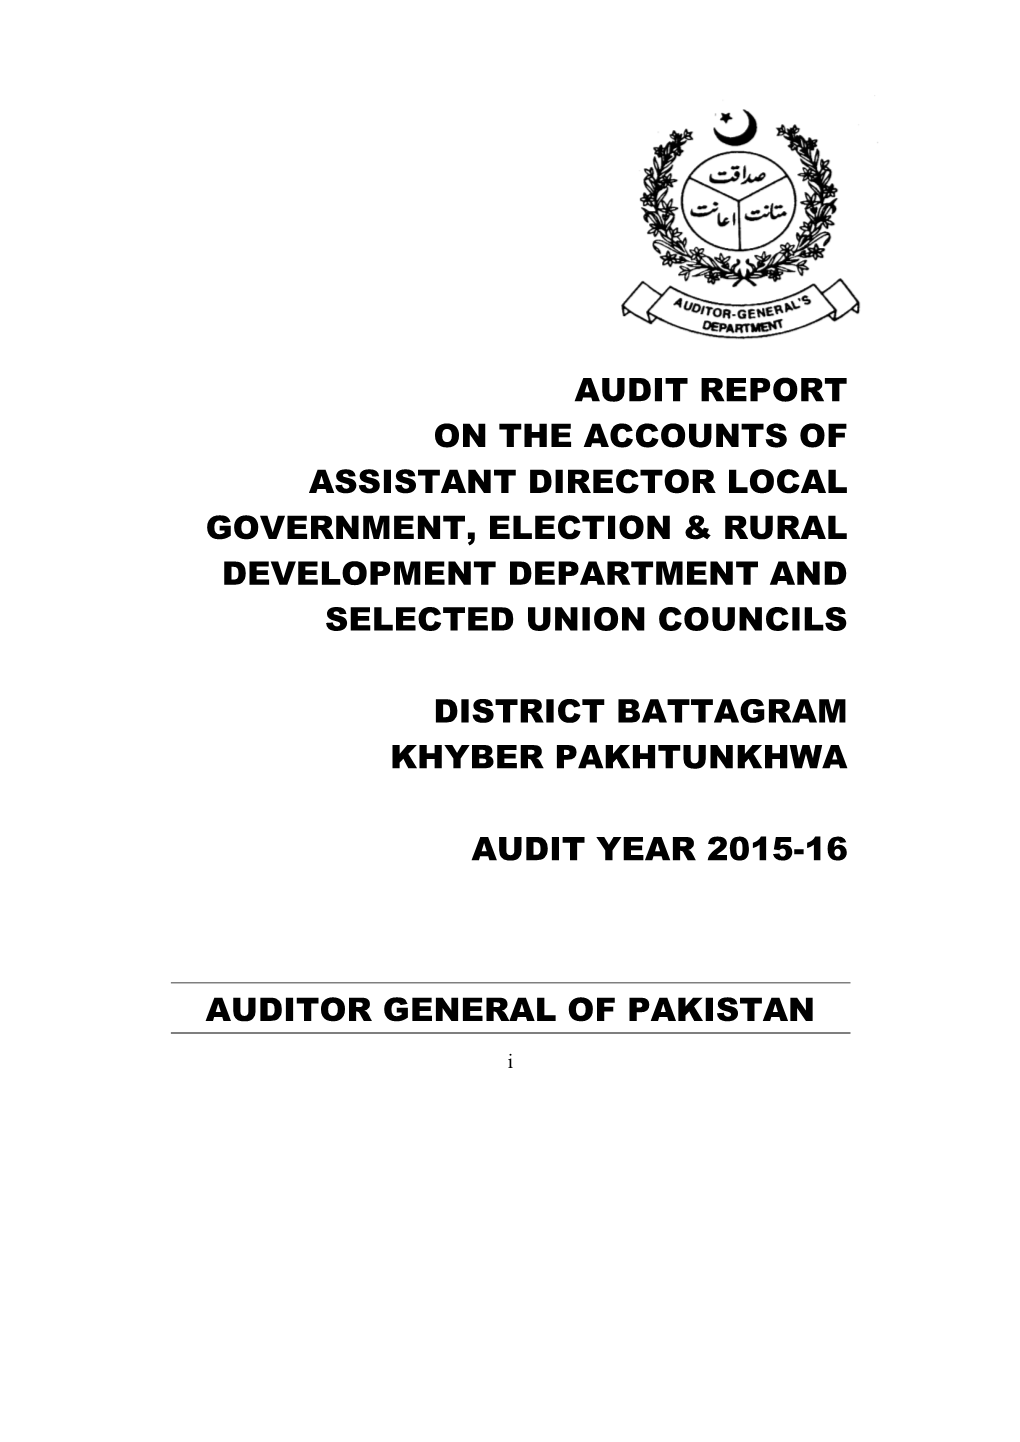 Audit Report on the Accounts of Assistant Director Local Government, Election & Rural Development Department and Selected U